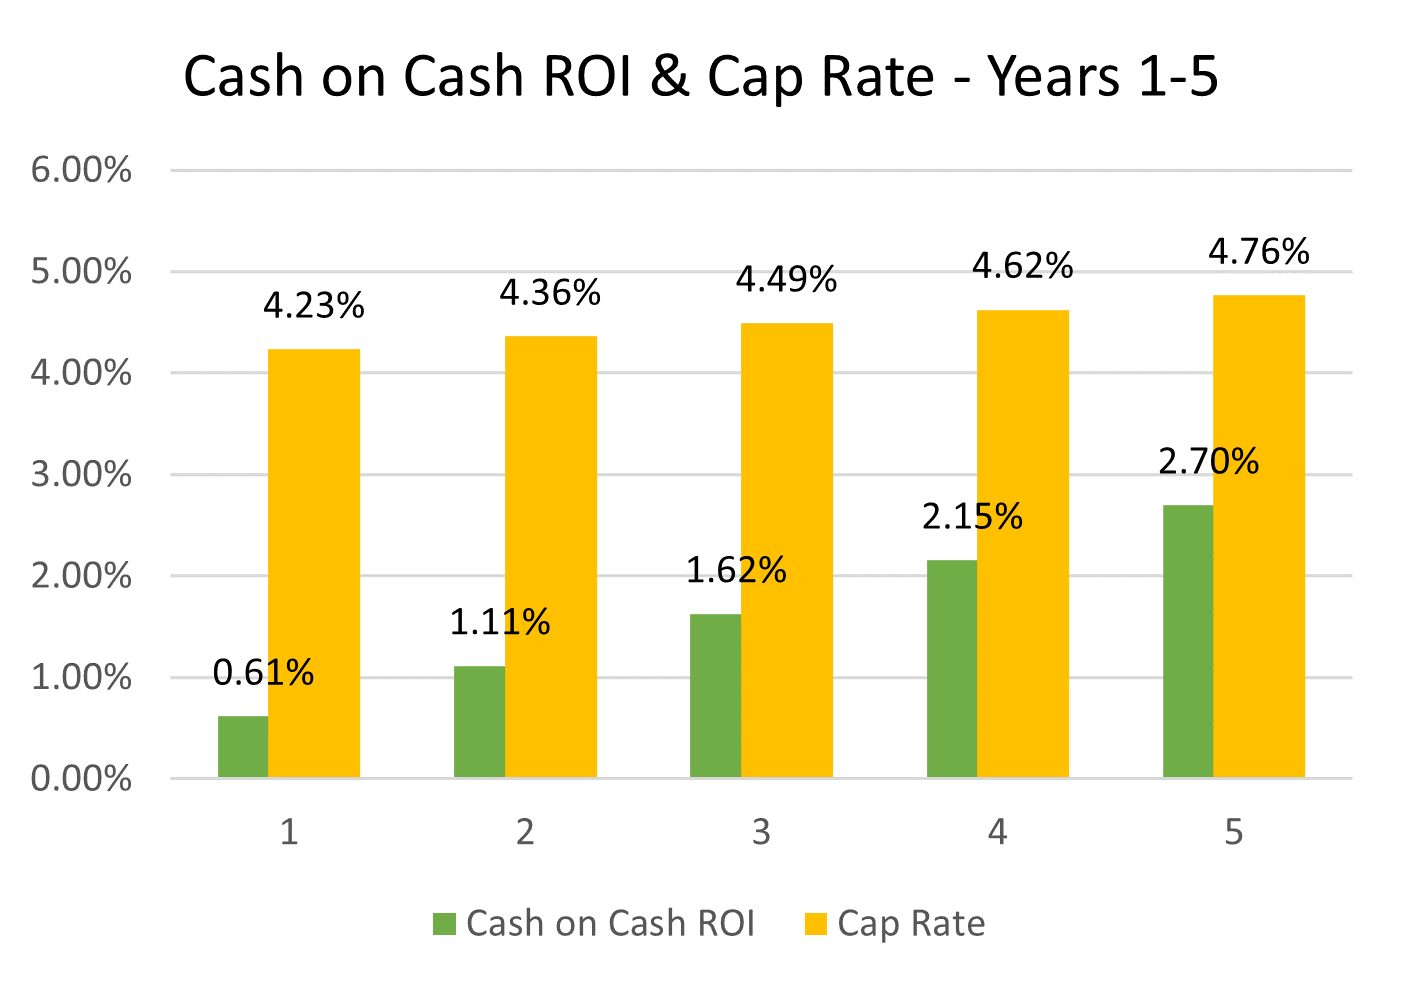 5 - Cash on Cash ROI and Cap Rate - Years 1-5